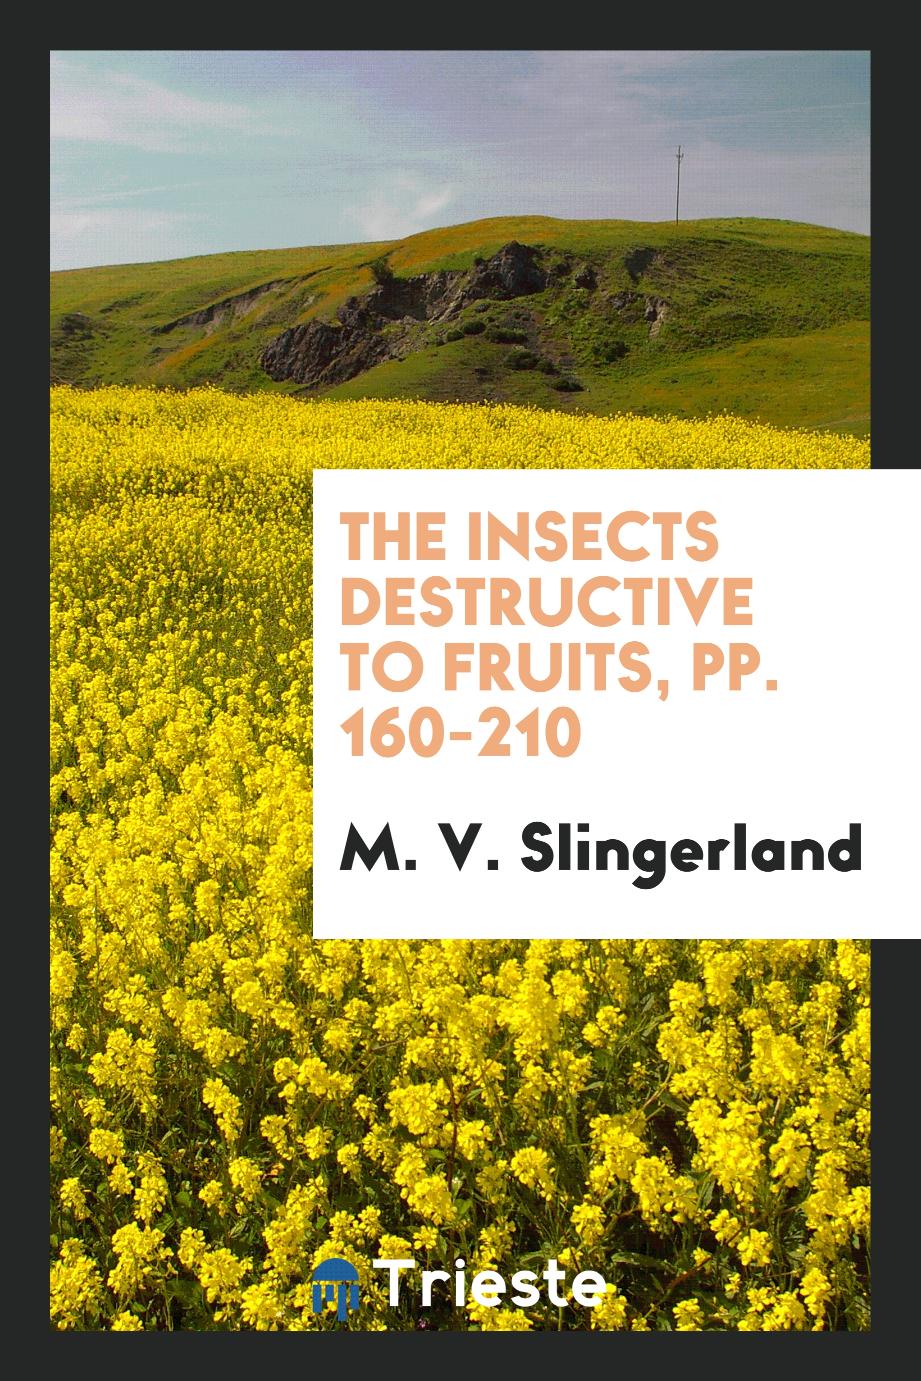 The Insects Destructive to Fruits, pp. 160-210